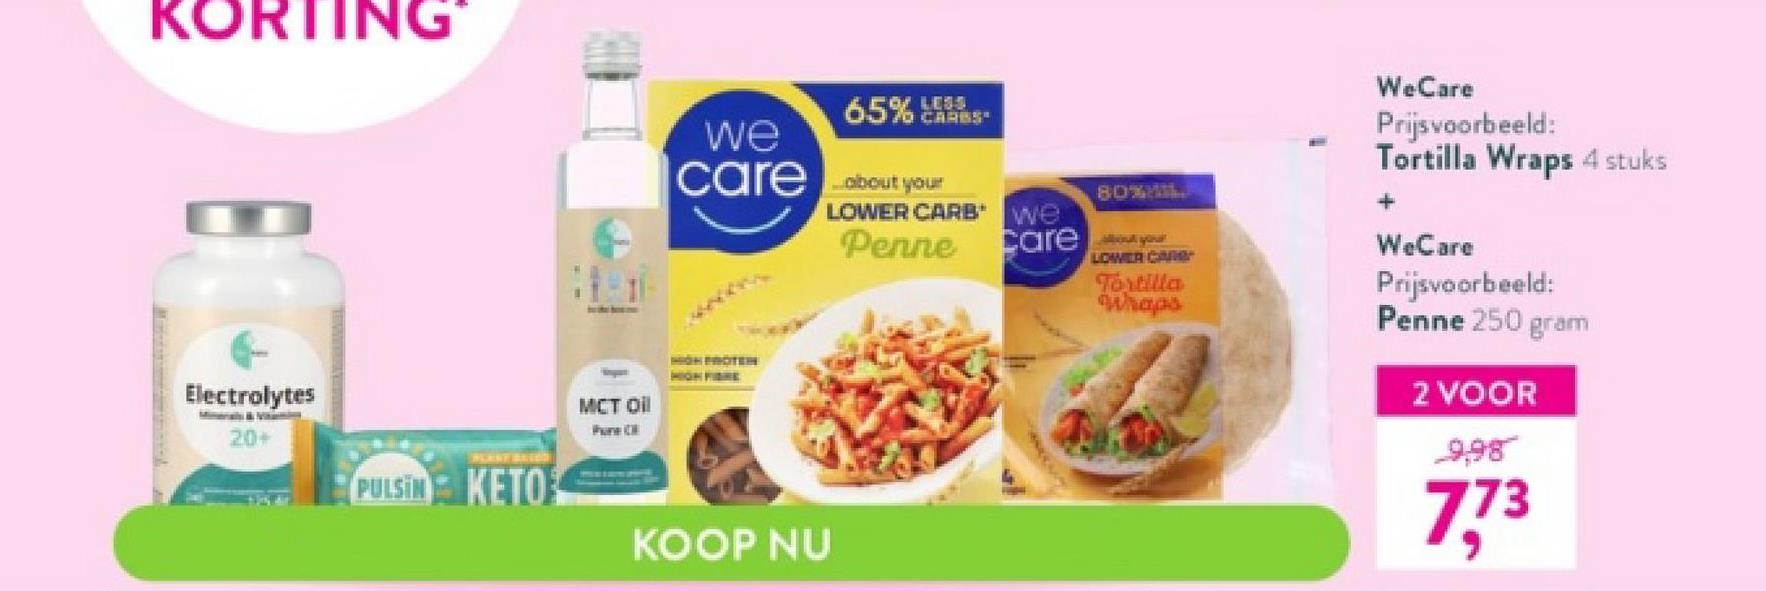 KORTING
Electrolytes
20+
PLANT BEVE
PULSIN KETO
MCT Oil
PC
we
care
HGH PROTEH
HIGH FIBRE
65% 433
KOOP NU
CARES
about your
LOWER CARB*
Penne
80%MIL
We
Carer
LOWER CARG
Tortilla
Whaps
WeCare
Prijsvoorbeeld:
Tortilla Wraps 4 stuks
+
WeCare
Prijsvoorbeeld:
Penne 250 gram
2 VOOR
9,98
7,73